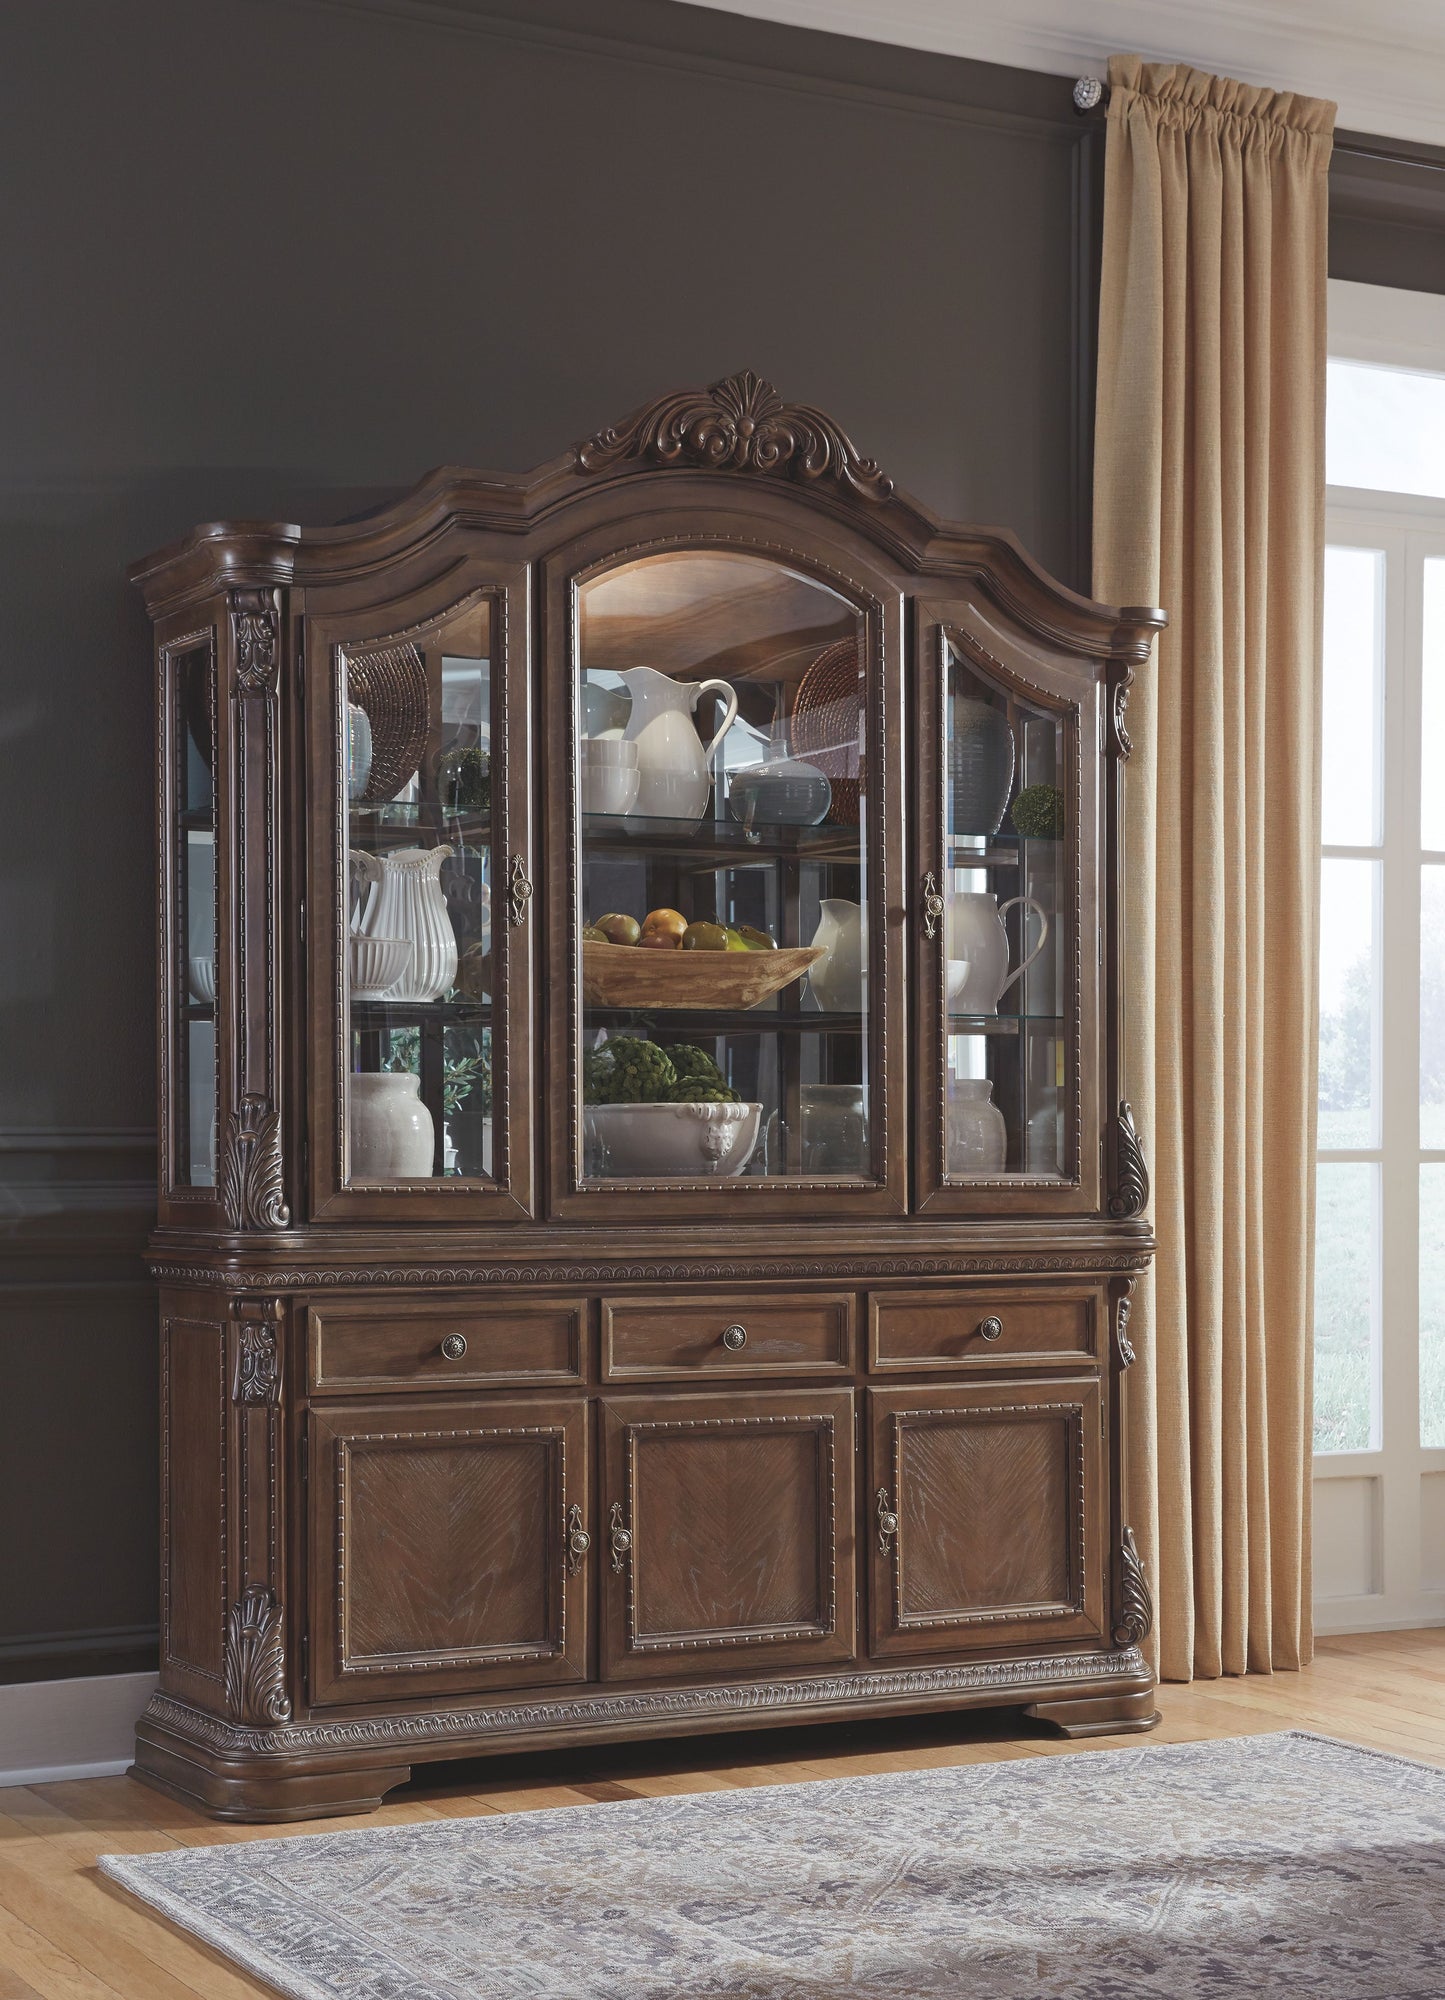 Charmond - Brown - Dining Room Buffet